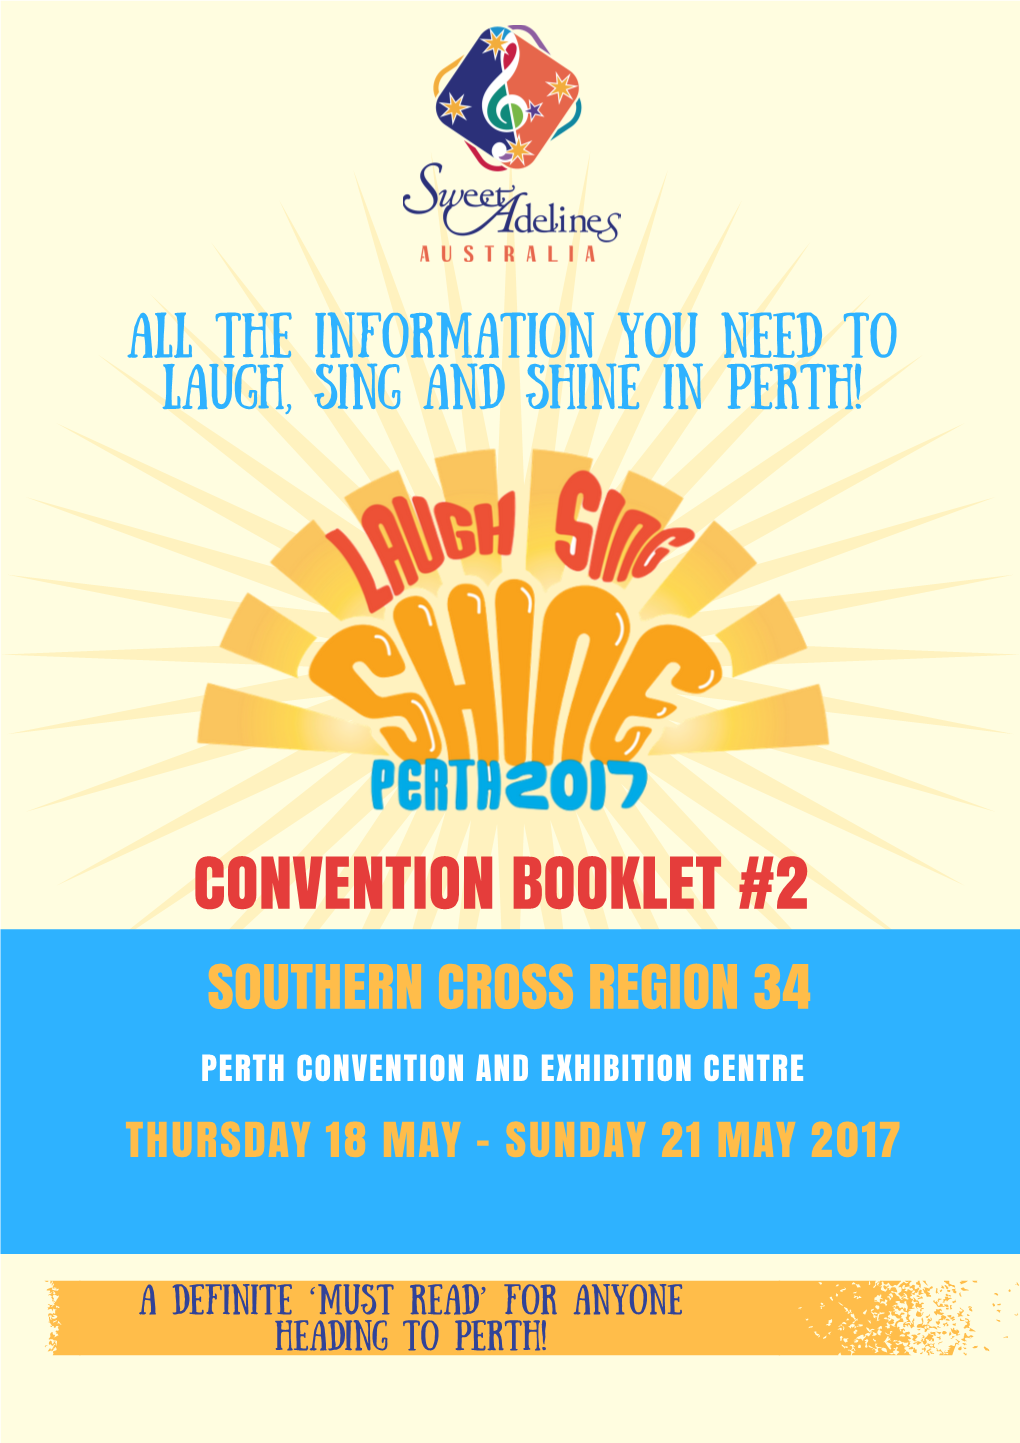 Convention Booklet #2 Southern Cross Region 34 Perth Convention and Exhibition Centre Thursday 18 May – Sunday 21 May 2017